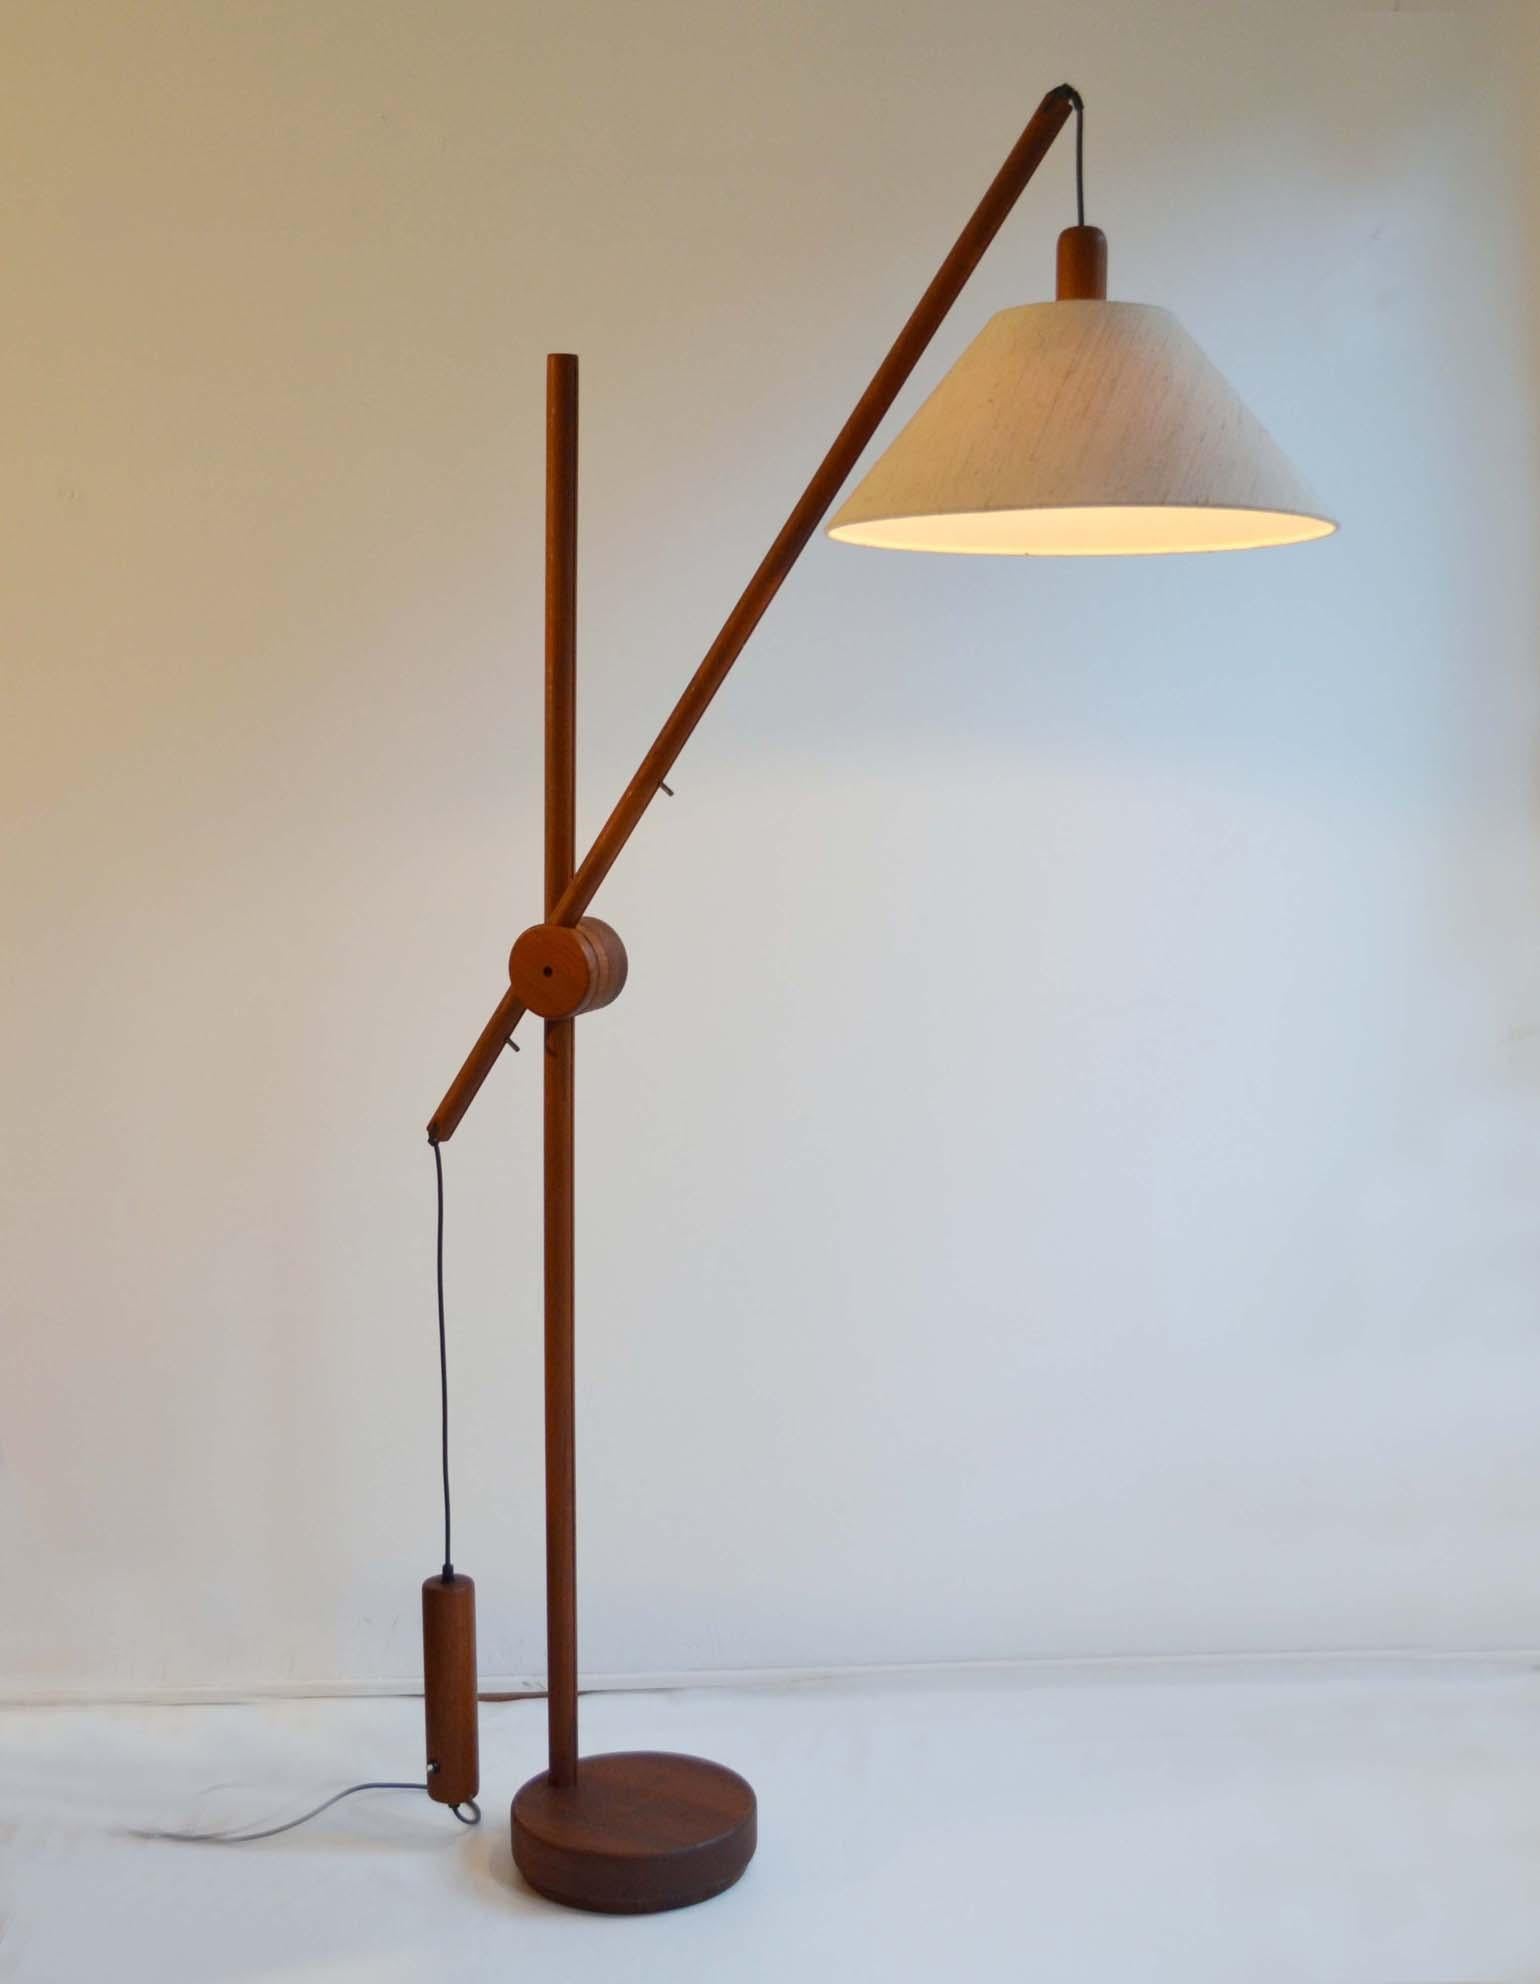 Scandinavian Mid-Century Modern floor lamp with original shade. The teak frame has an adjustable arm with counterbalance weight for perfect positioning of the light. The lamp is engineered with a lot of functional details. The original shade and